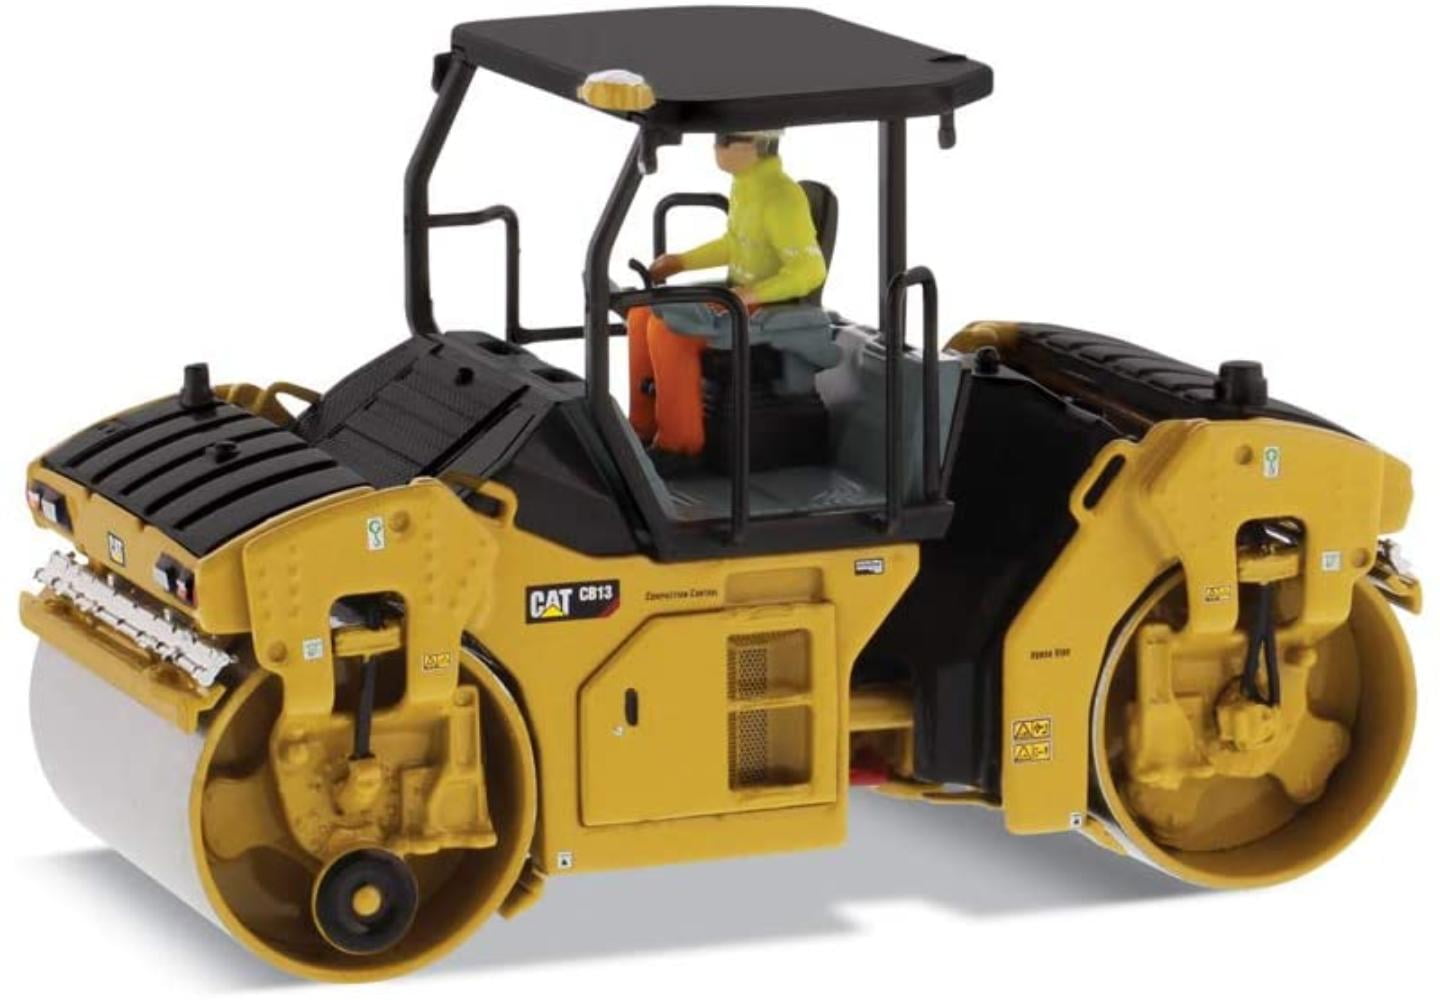 Caterpillar Cat CB13 Tandem Vibratory Roller-Rops with ROPS 1/50 By DM 85594 Car 